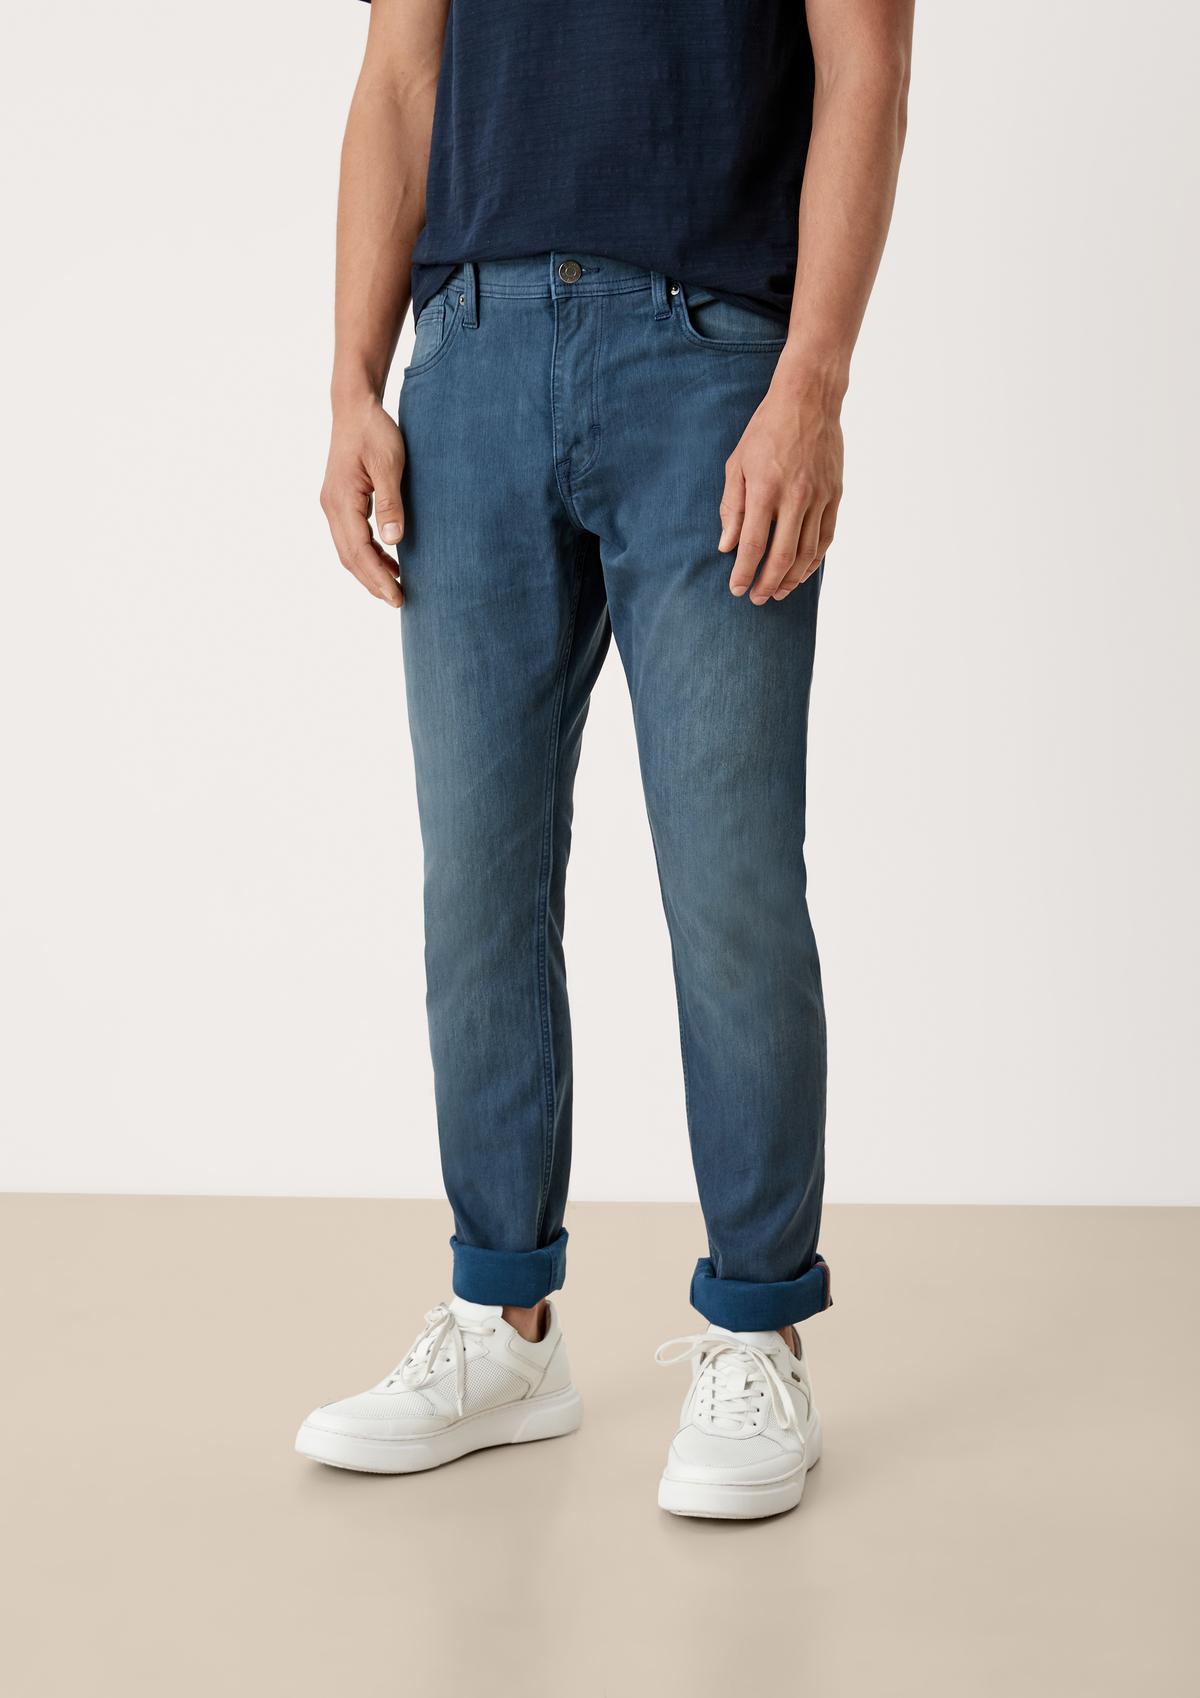 s.Oliver Jeans Keith / Slim Fit / Mid Rise / Tapered Leg